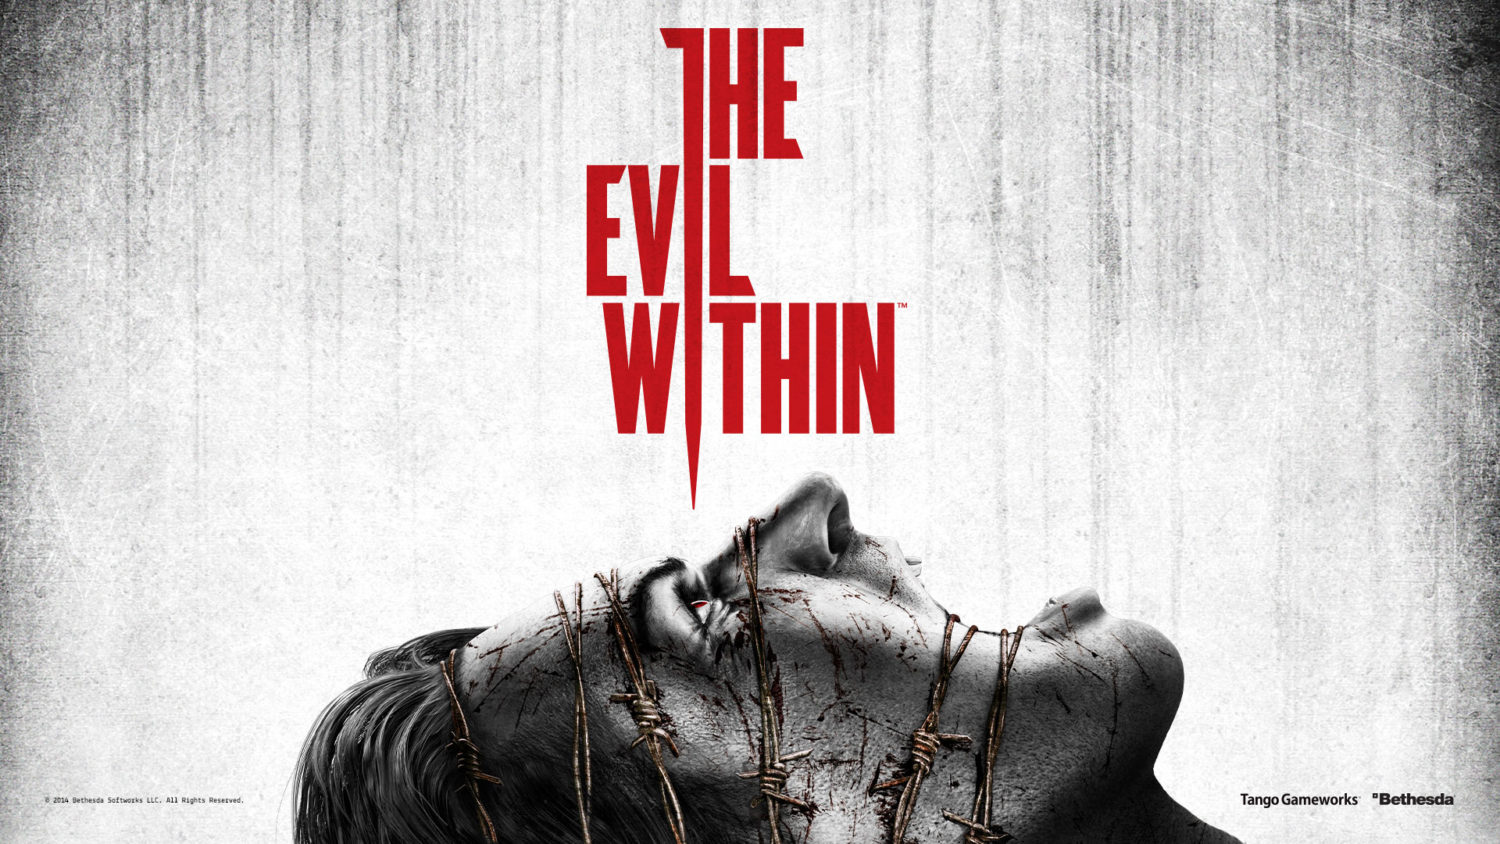 The official review of The Evil Within by ModernHorrors.com